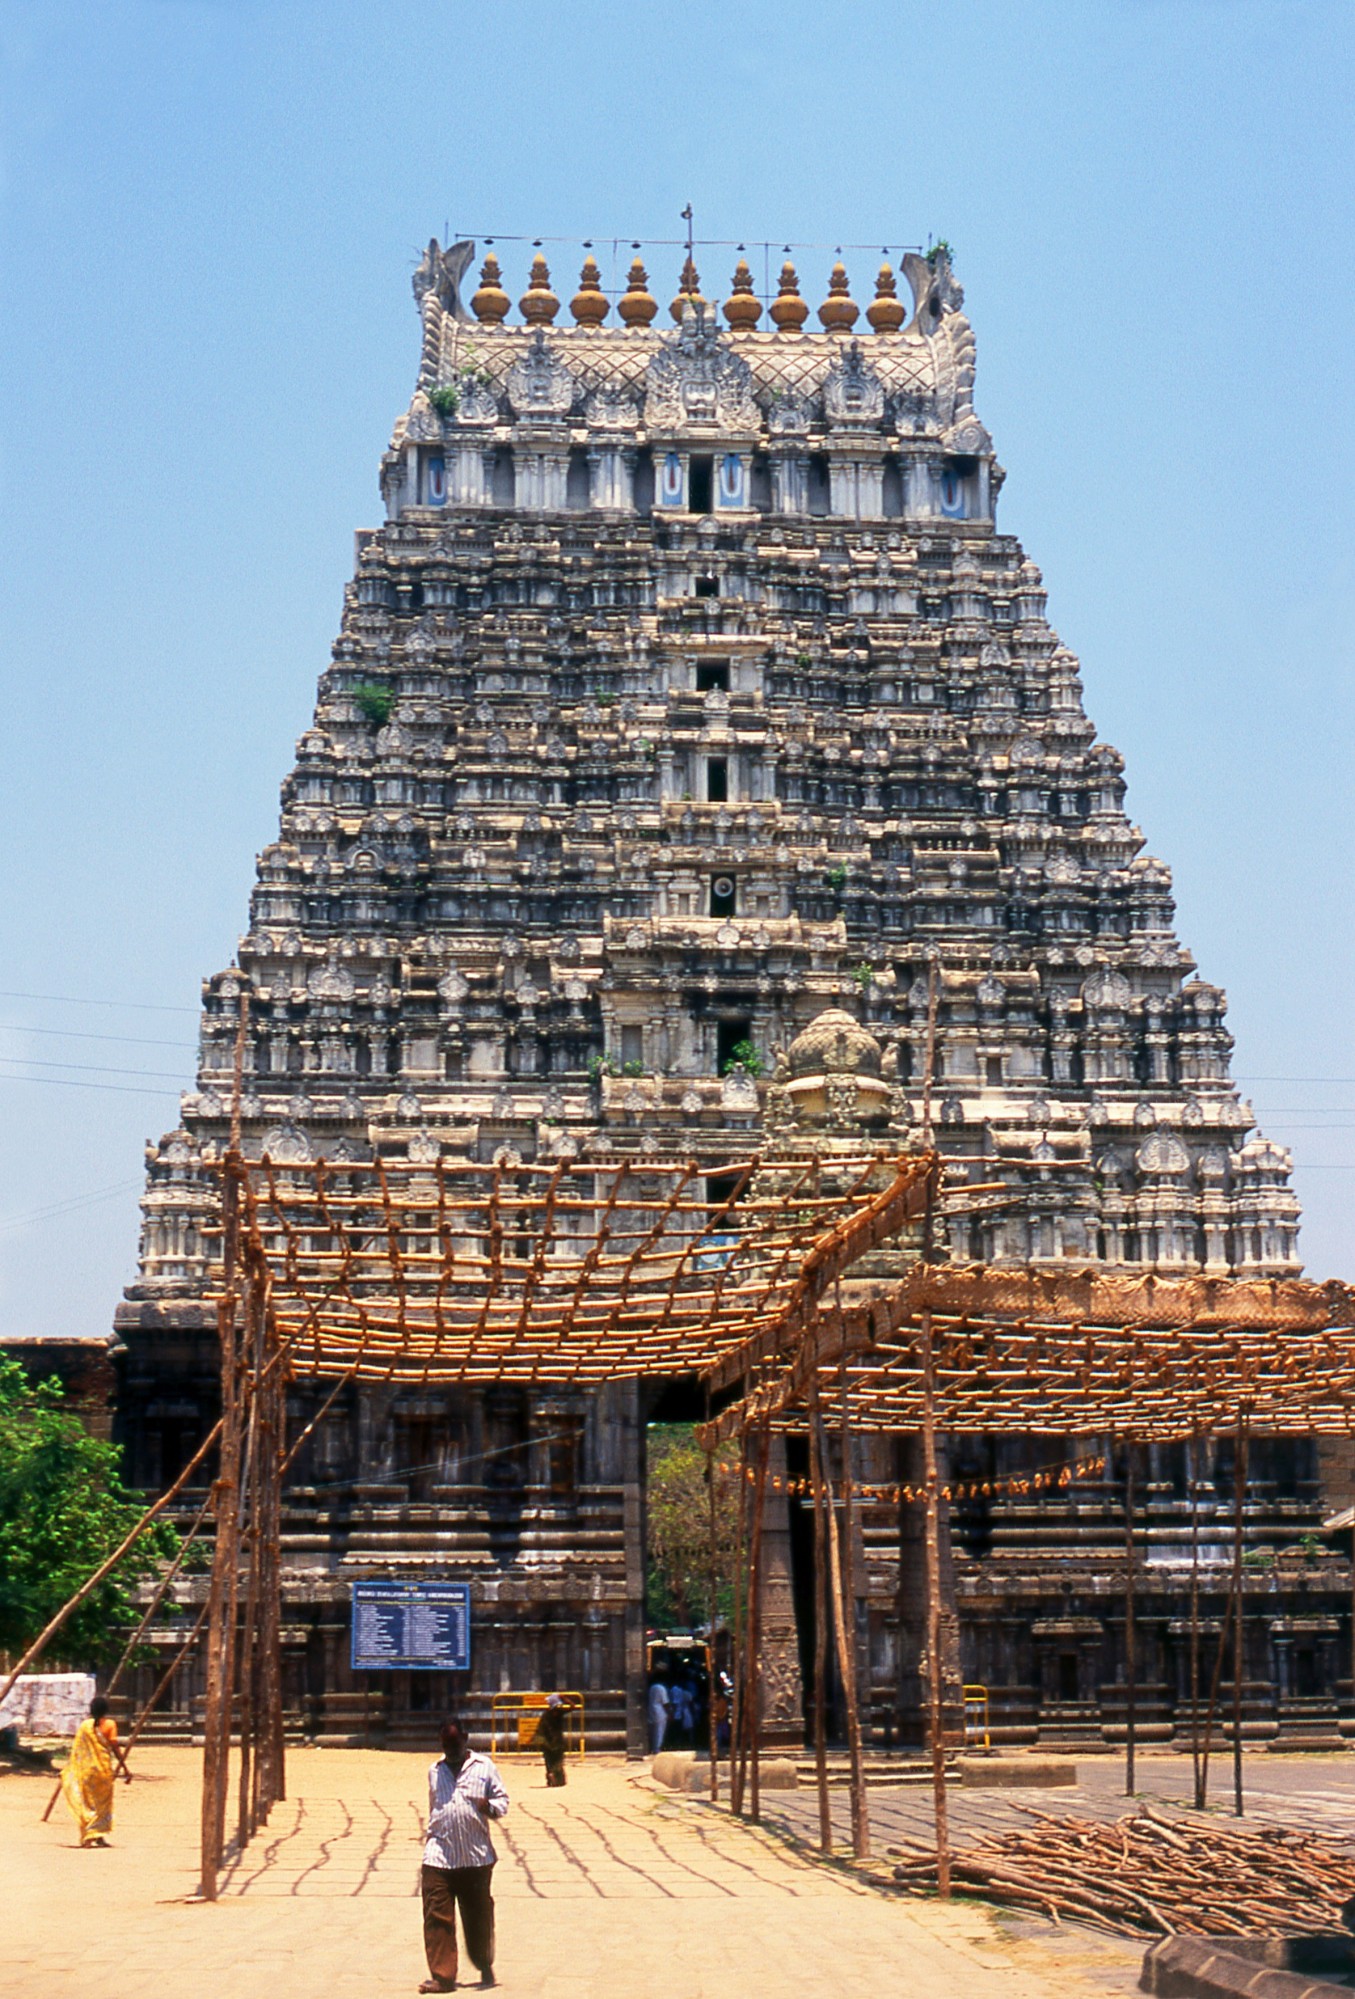 The Varadharaja Perumal Temple or Hastagiri or Attiyuran is a Hindu temple dedicated to Lord Vishnu and is one of the Divya Desams, the 108 temples of Vishnu believed to have been visited by the 12 poet saints, or Alwars.

It was originally built by the Cholas in 1053 and was later expanded during the reigns of the great Chola kings Kulottunga Chola I and Vikrama Chola. In the 14th century another wall and a gopura was built by the later Chola kings.